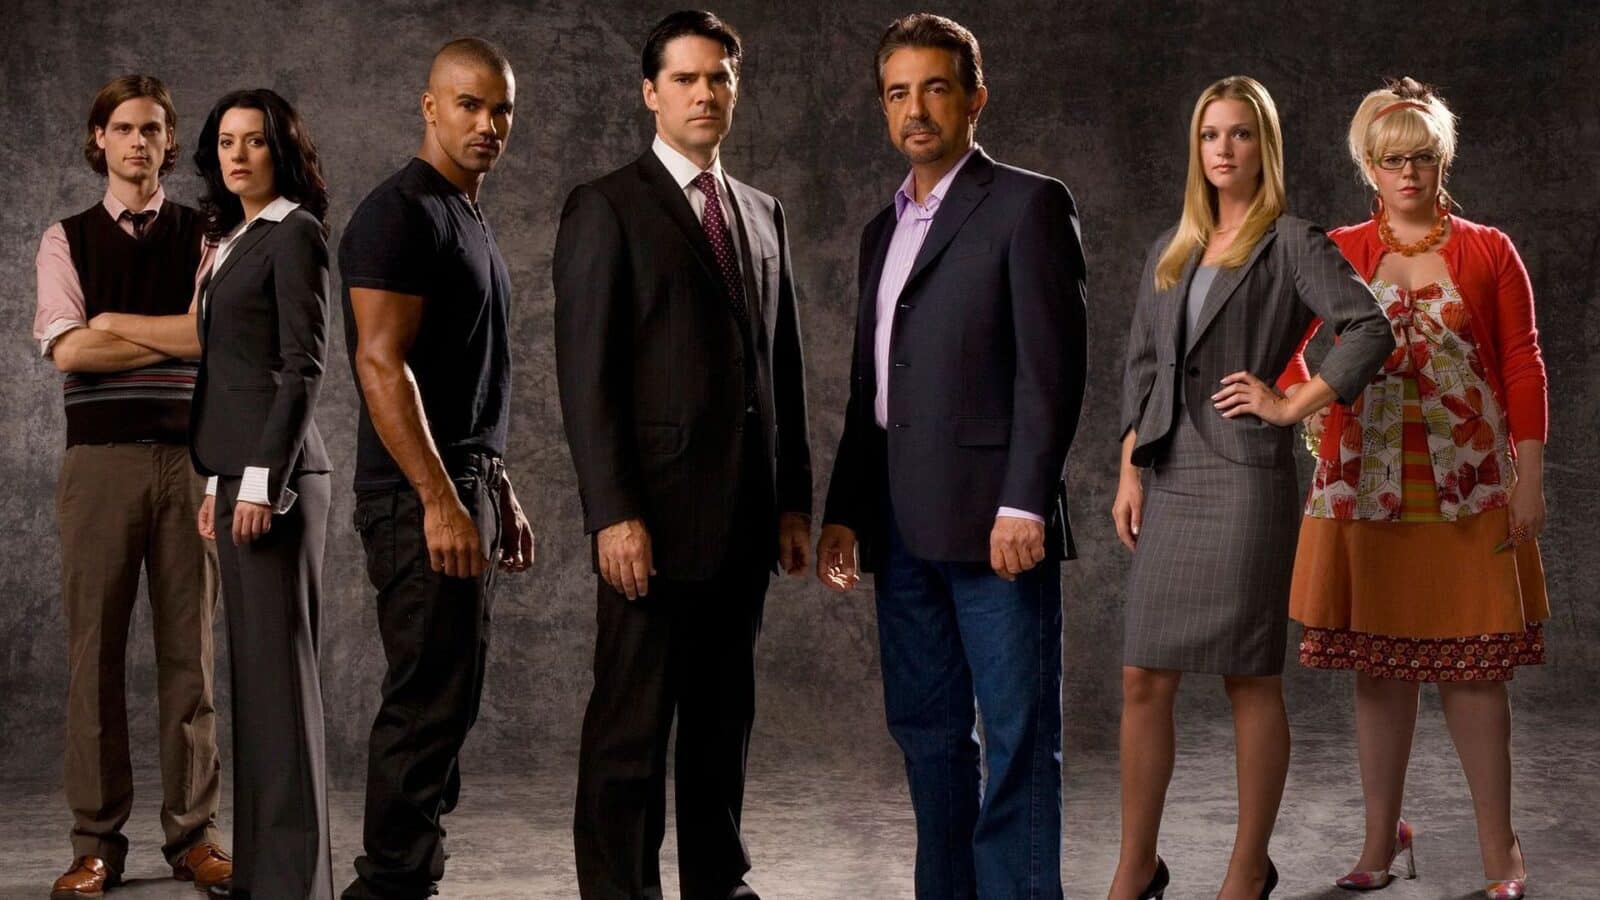 Will There Be A Season 17 of Criminal Minds? Read More To Know About The Release Dates, Cast, And Spoilers